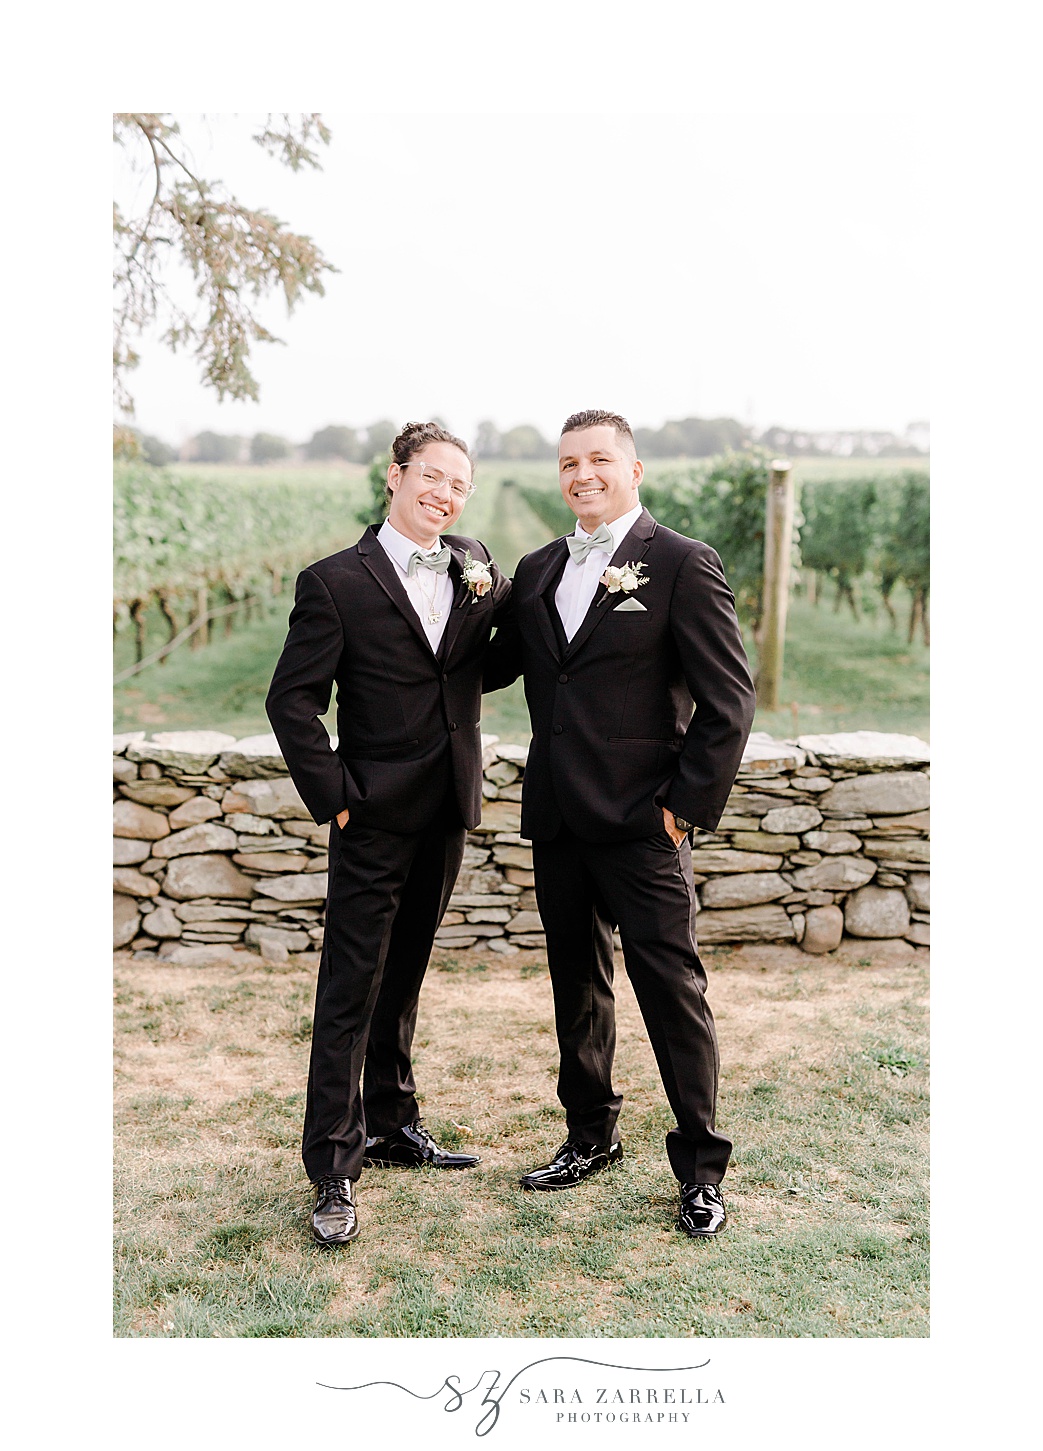 groom poses with brother by stone wall at Newport Vineyards